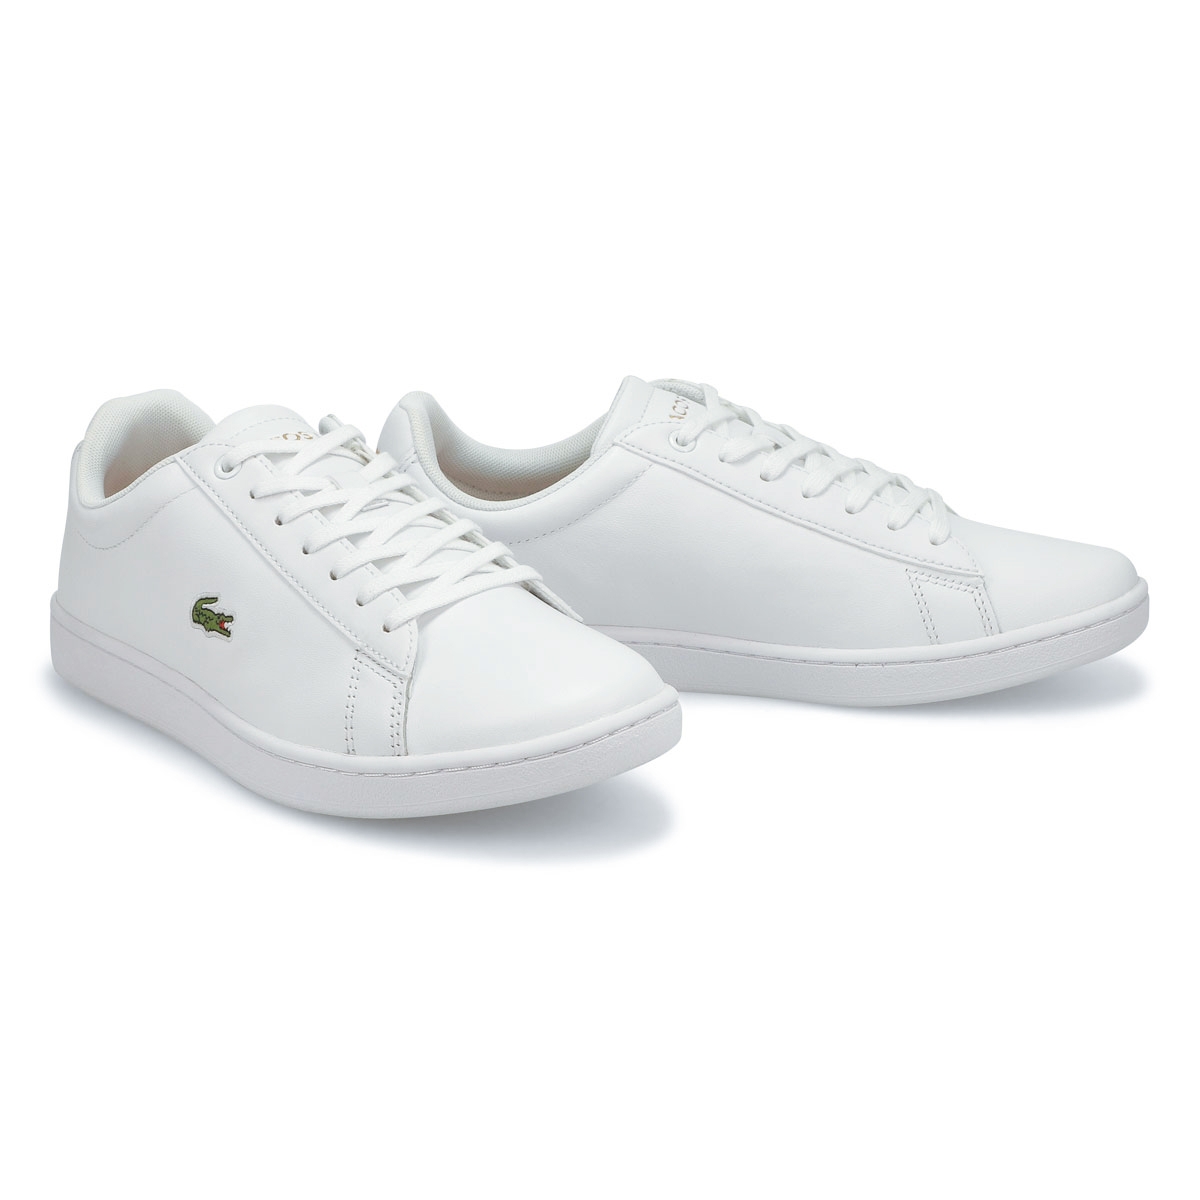 Total 37+ imagen lacoste usa shoes - Abzlocal.mx